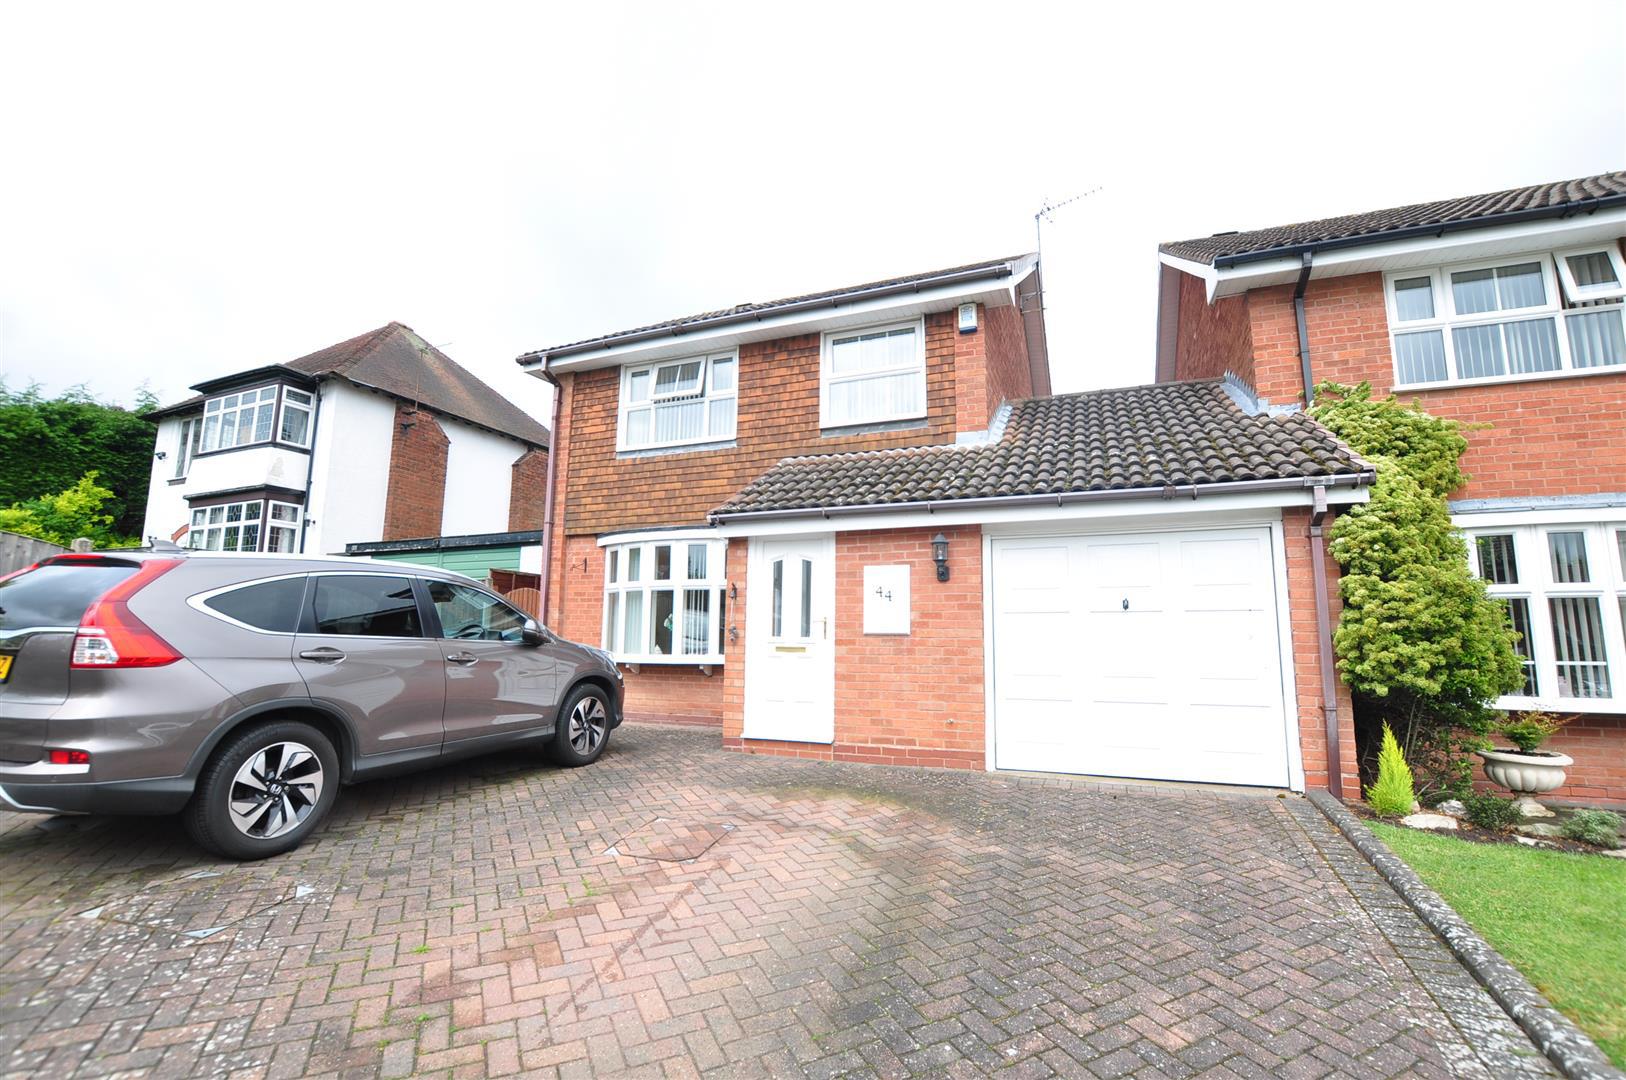 4 bed detached house for sale in Cherry Tree Lane, Halesowen  - Property Image 20